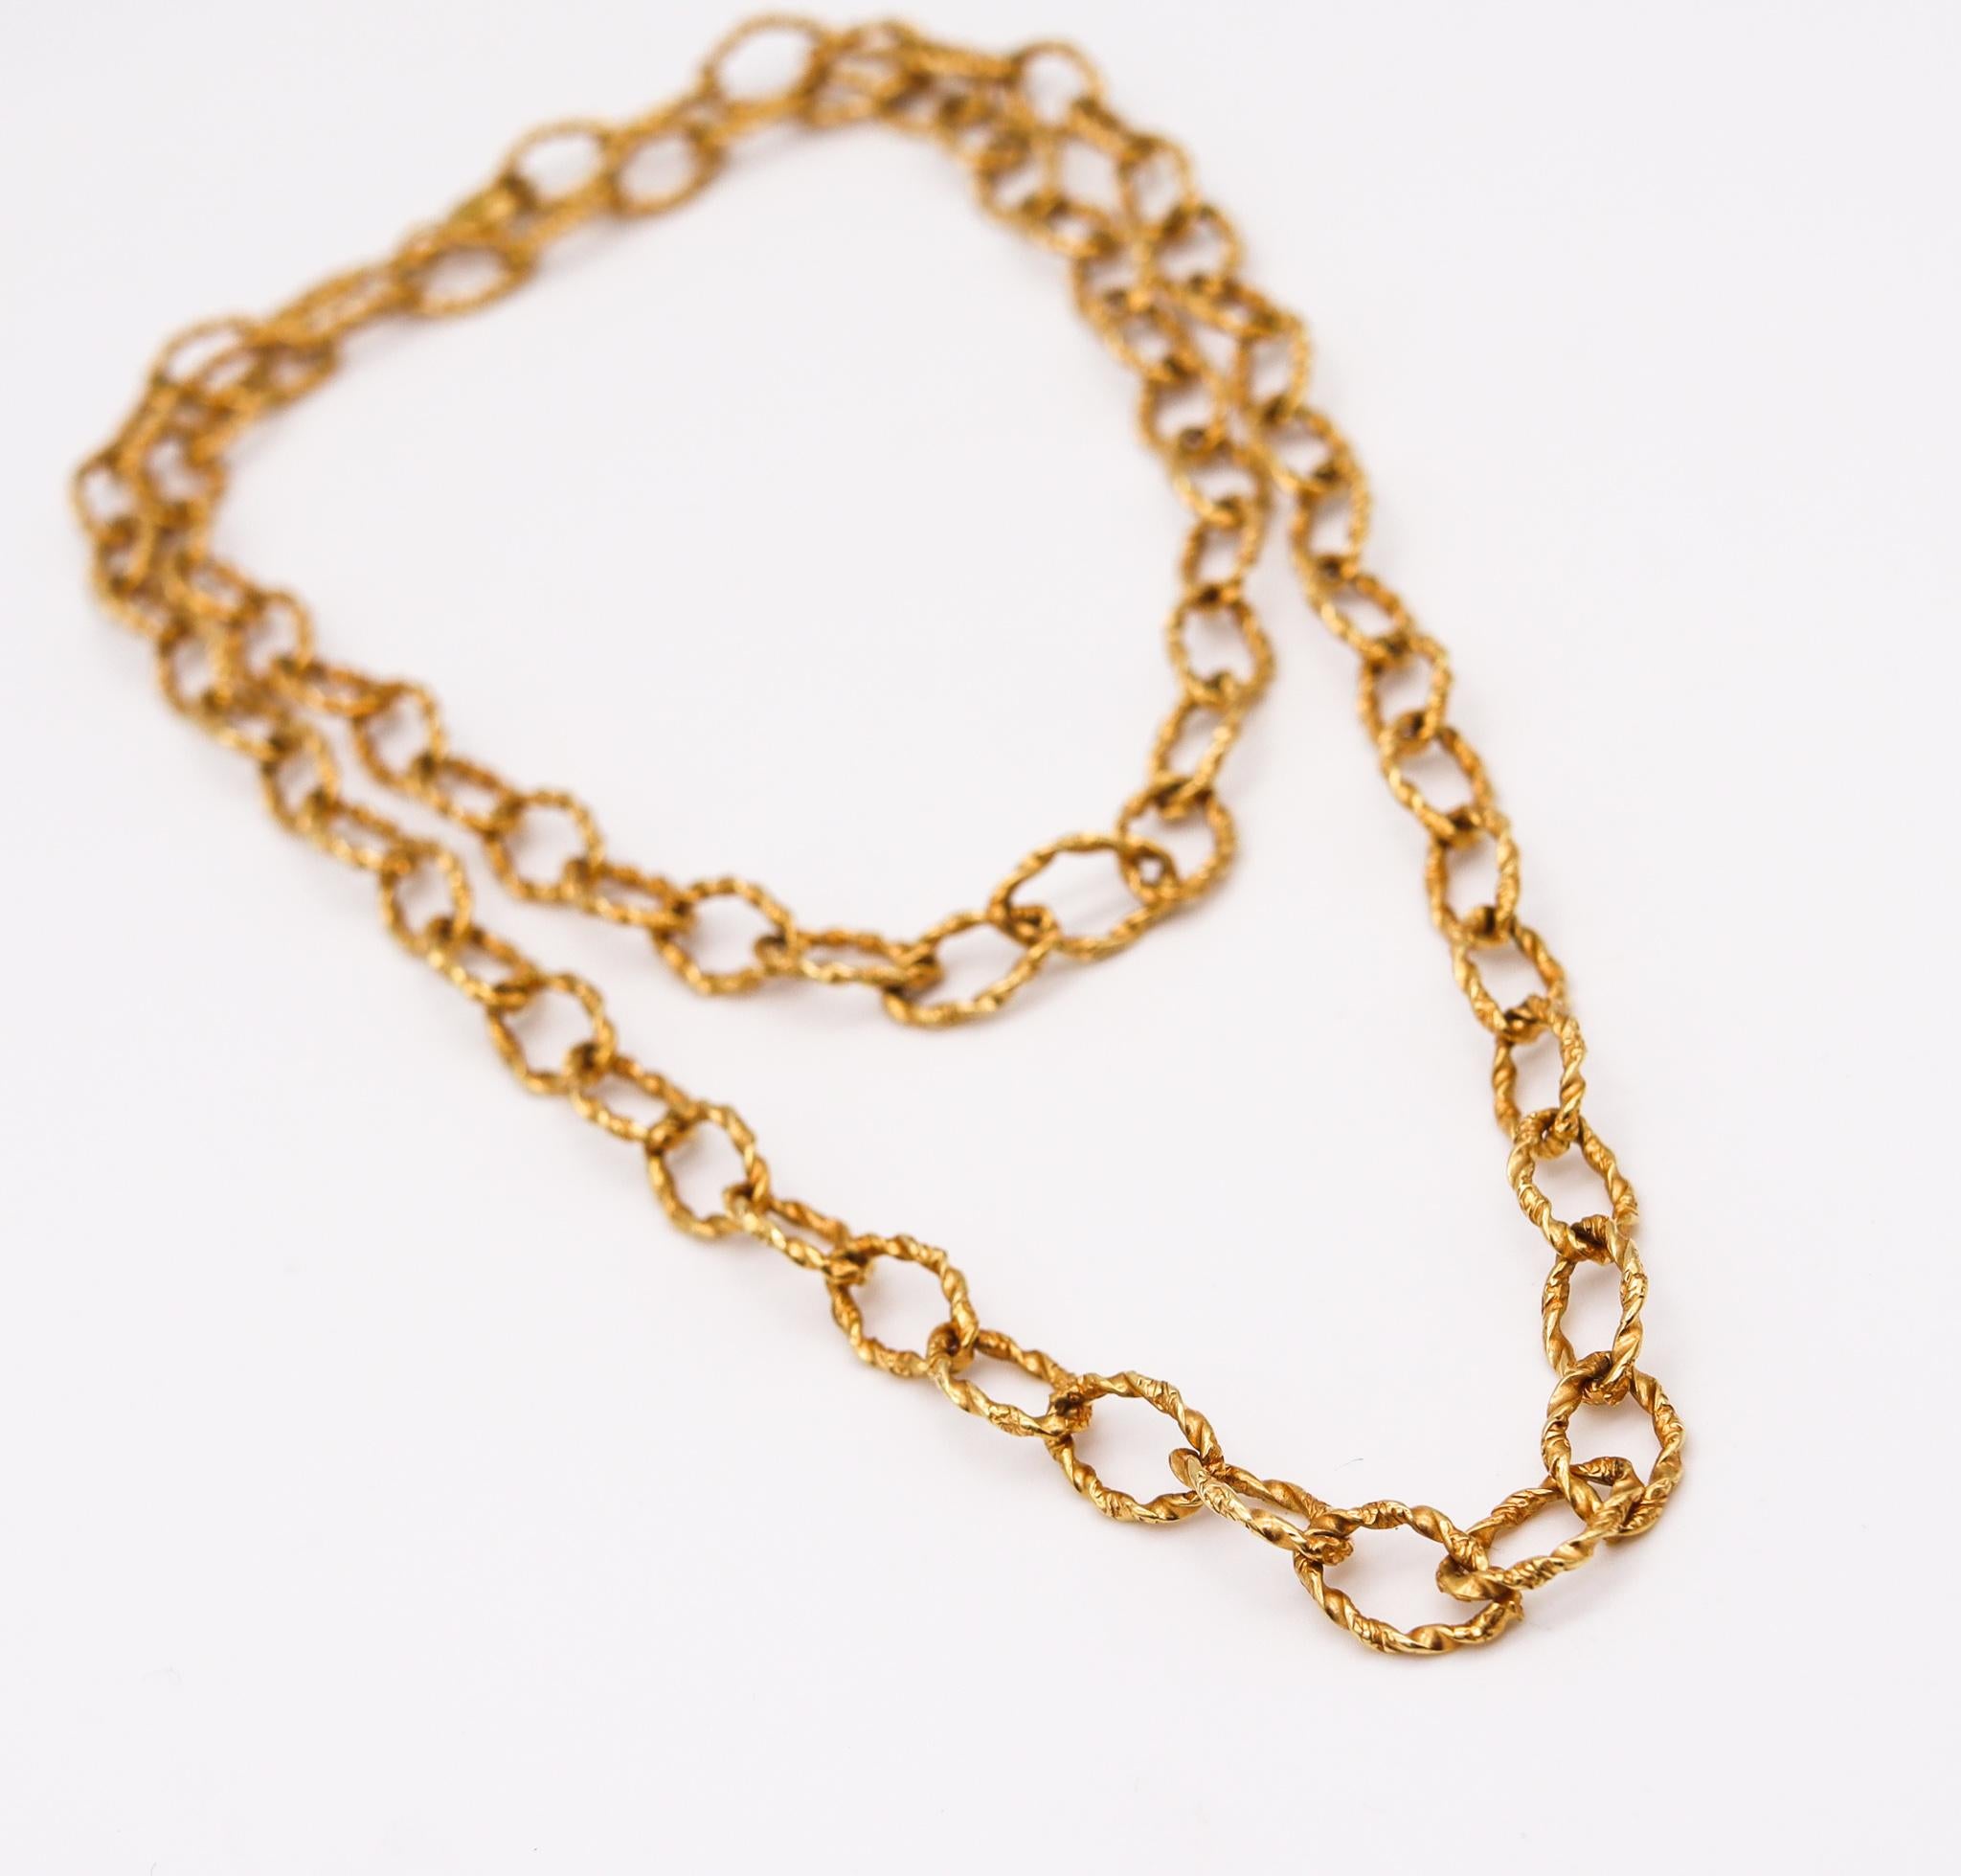 A textured retro-modern chain 

Beautiful retro modernist chain, created in Napoles Italy back in the 1960's. It was crafted with free forms twisted links in solid textured yellow gold of 18 karats. Fitted with an integrated crab lock following the